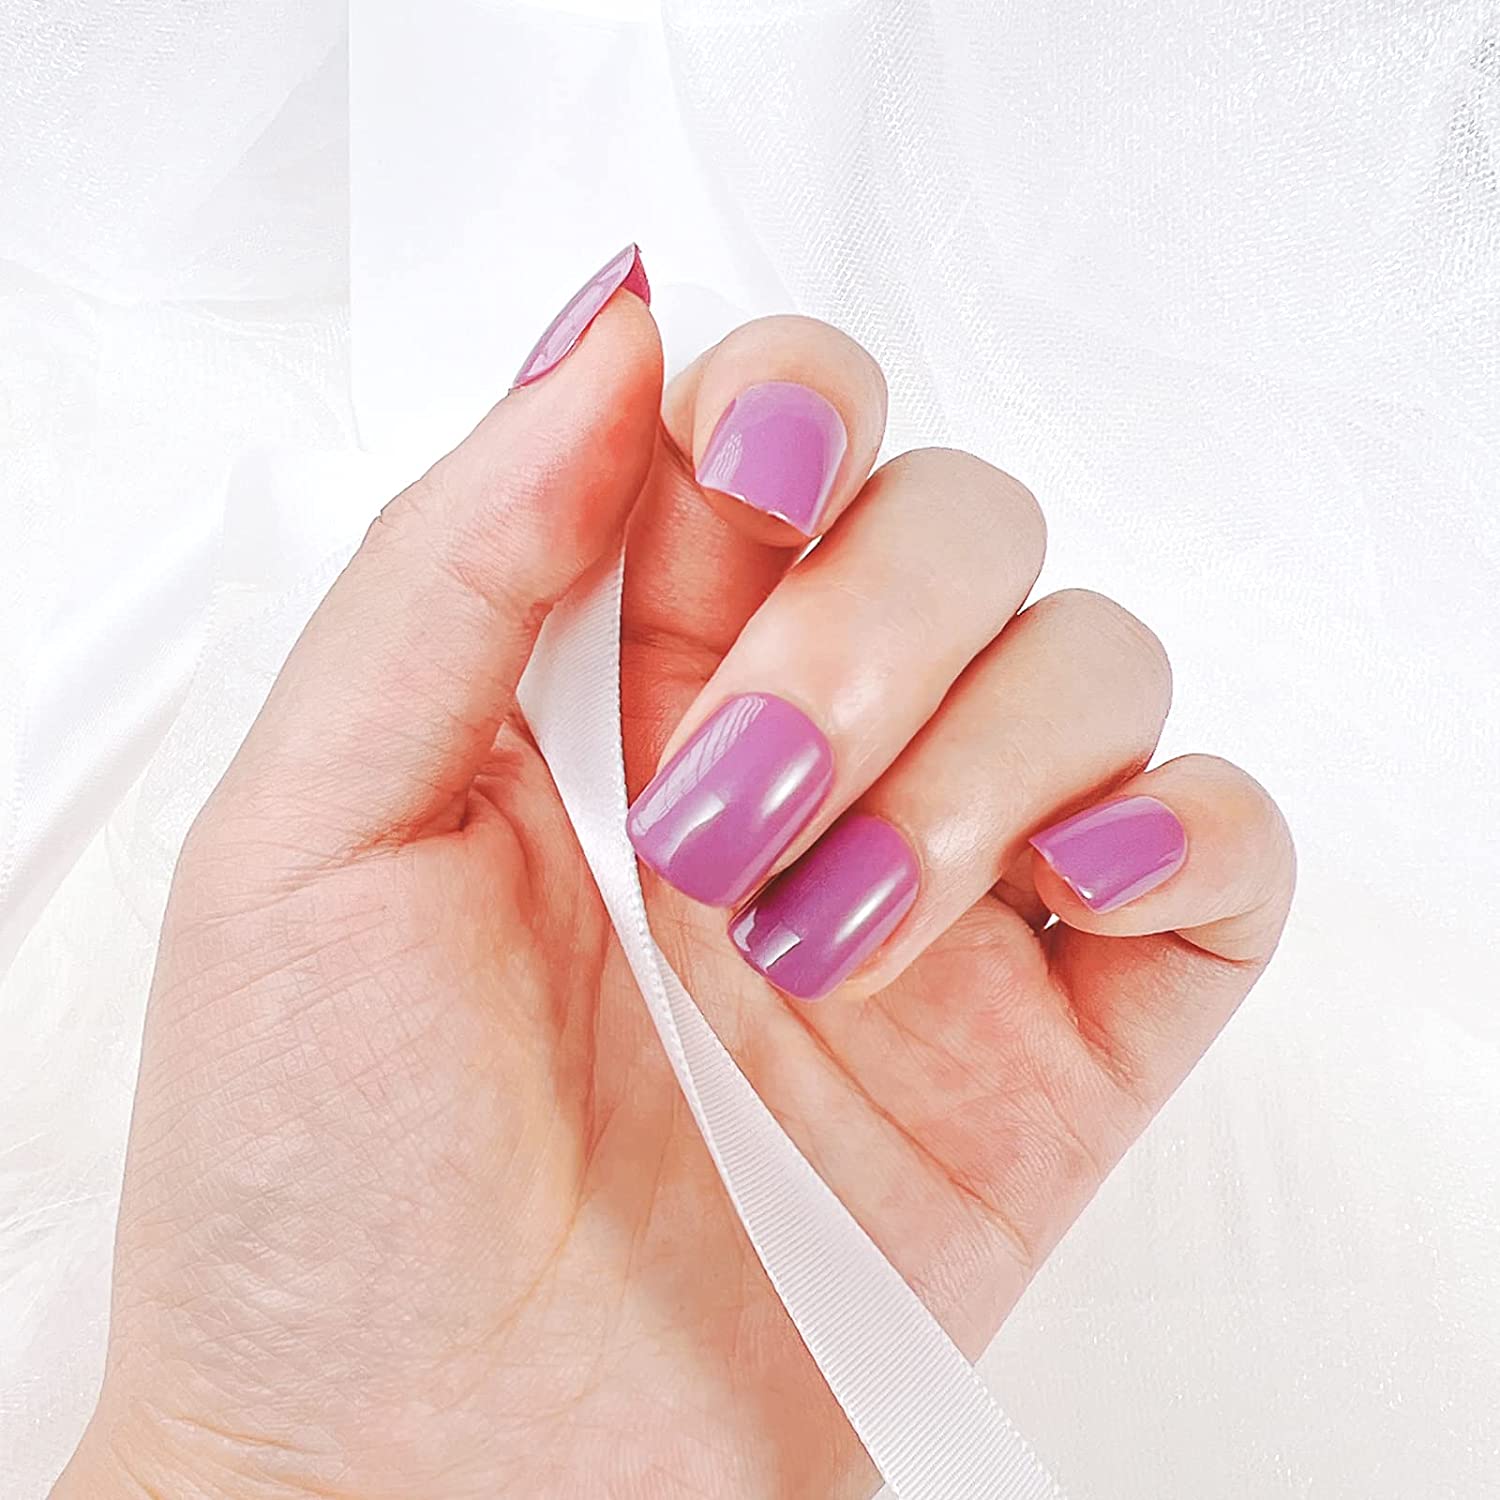 Short Press On Nails Glossy Fake Nails With Gel Finish For Women Solid Color 24pcs (LAVENDER) 24pcs